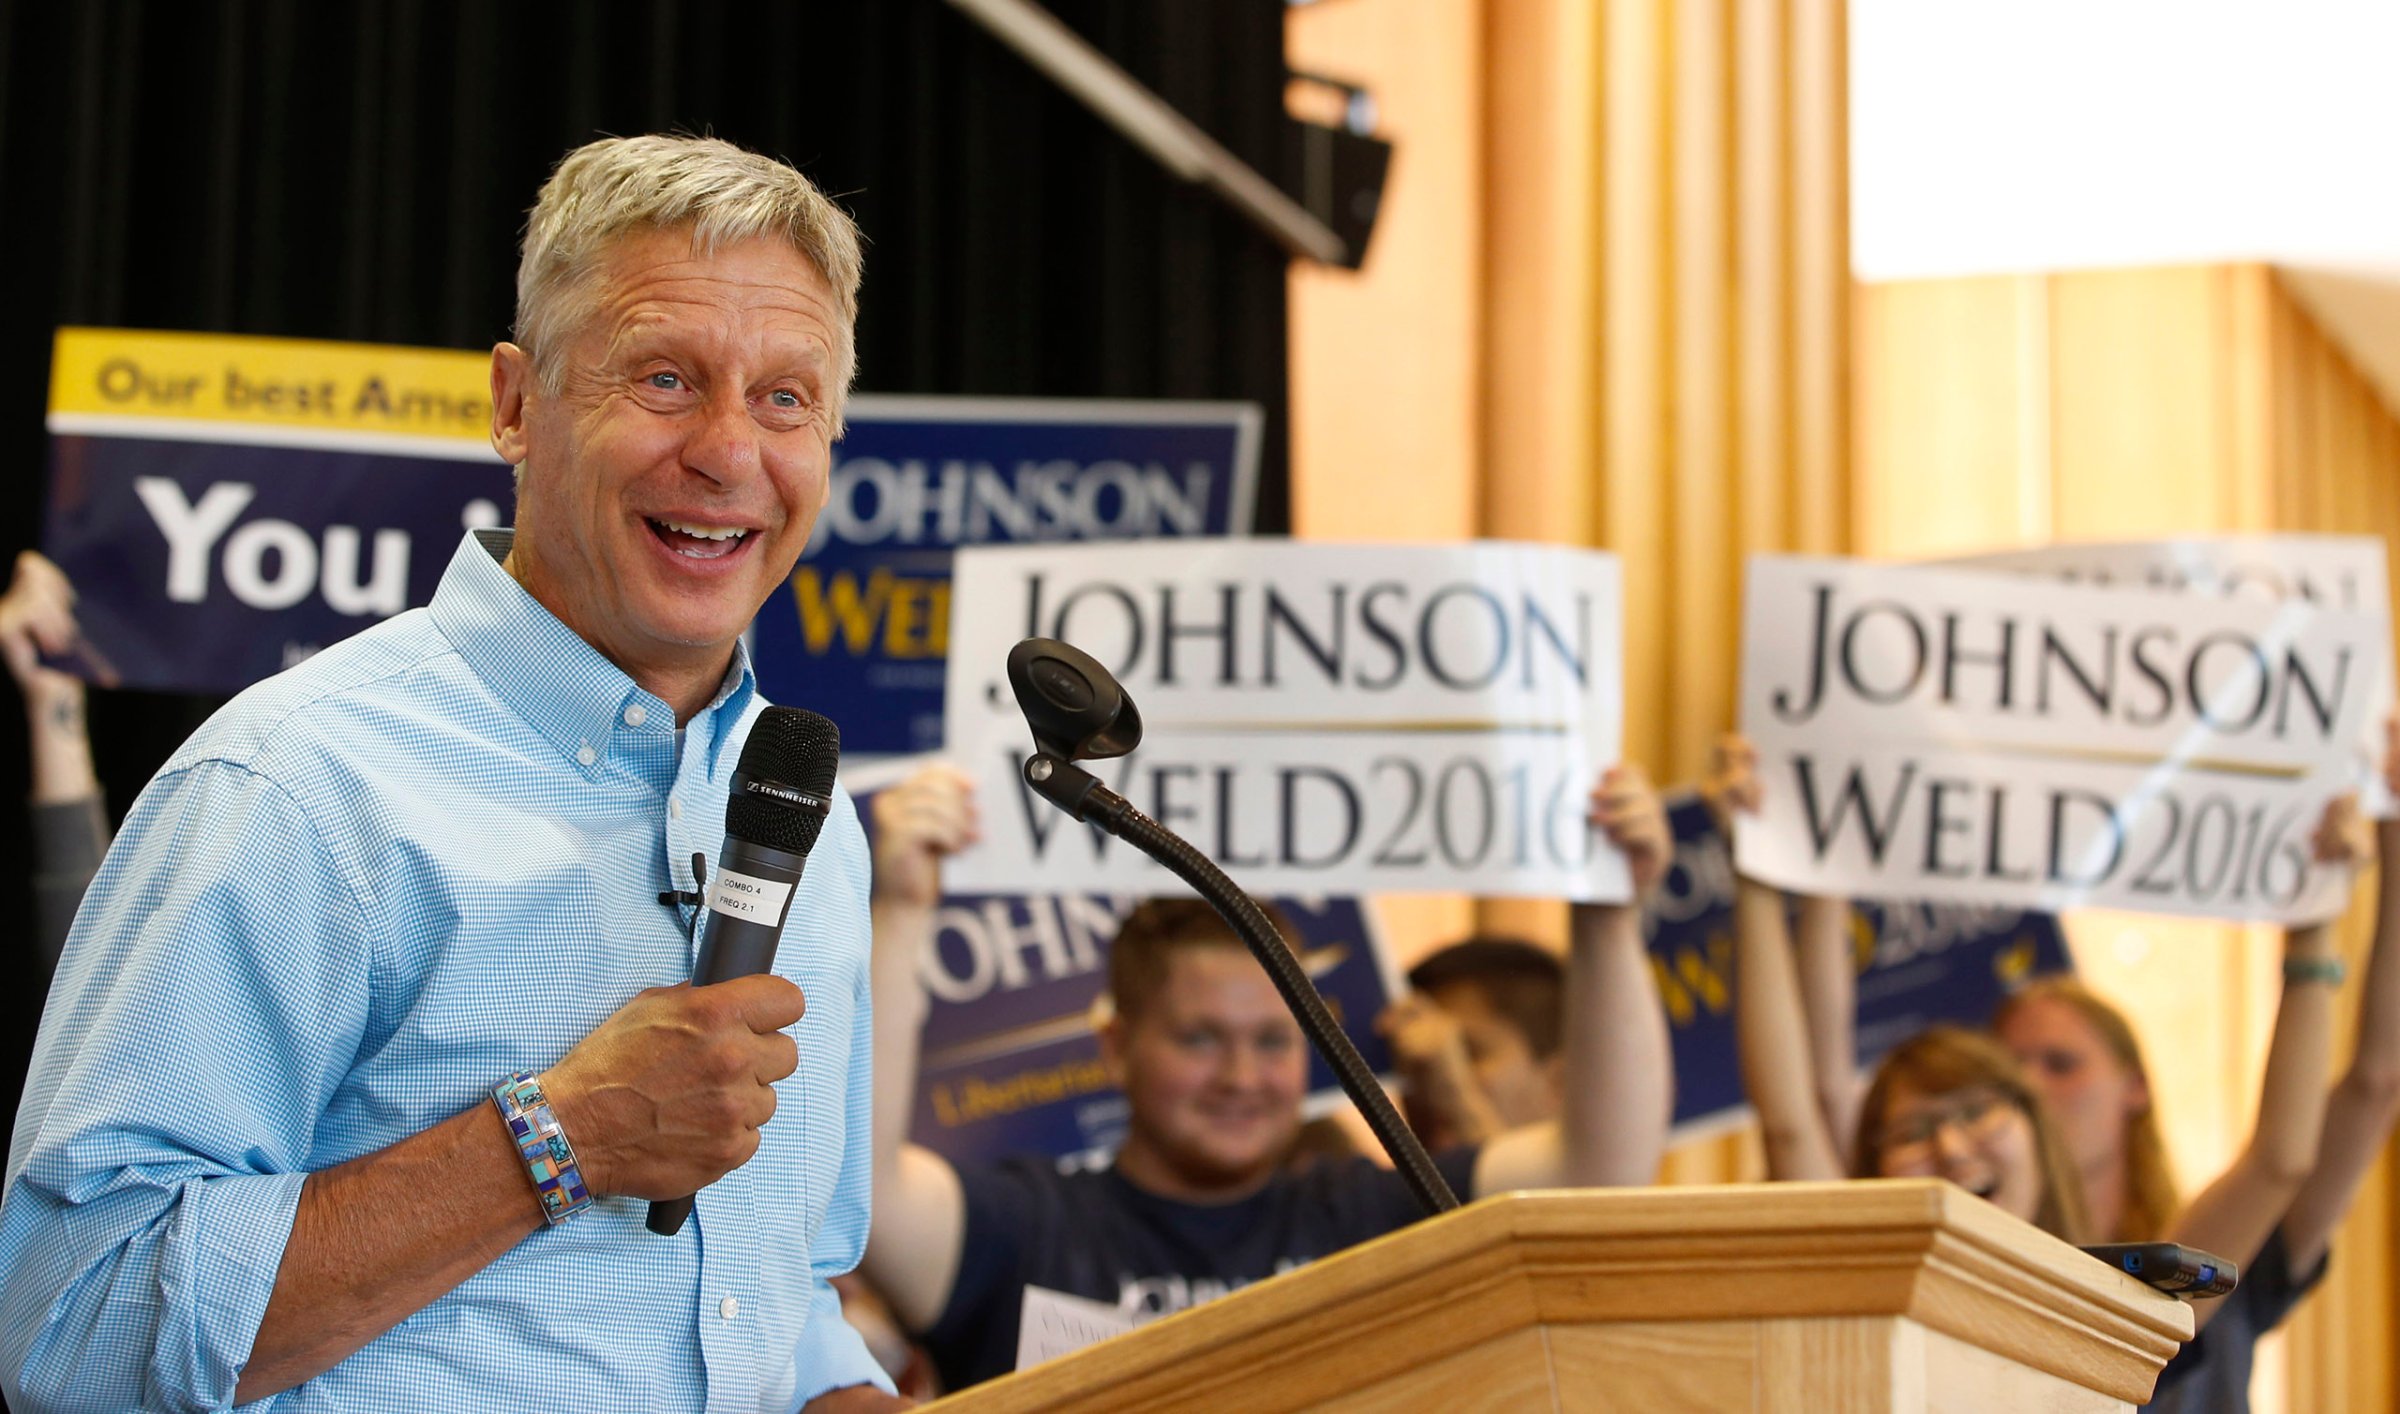 Libertarian presidential candidate Gary Johnson talks to a crowd of supporters at a rally in Salt Lake City, Utah, on Aug. 6, 2016.